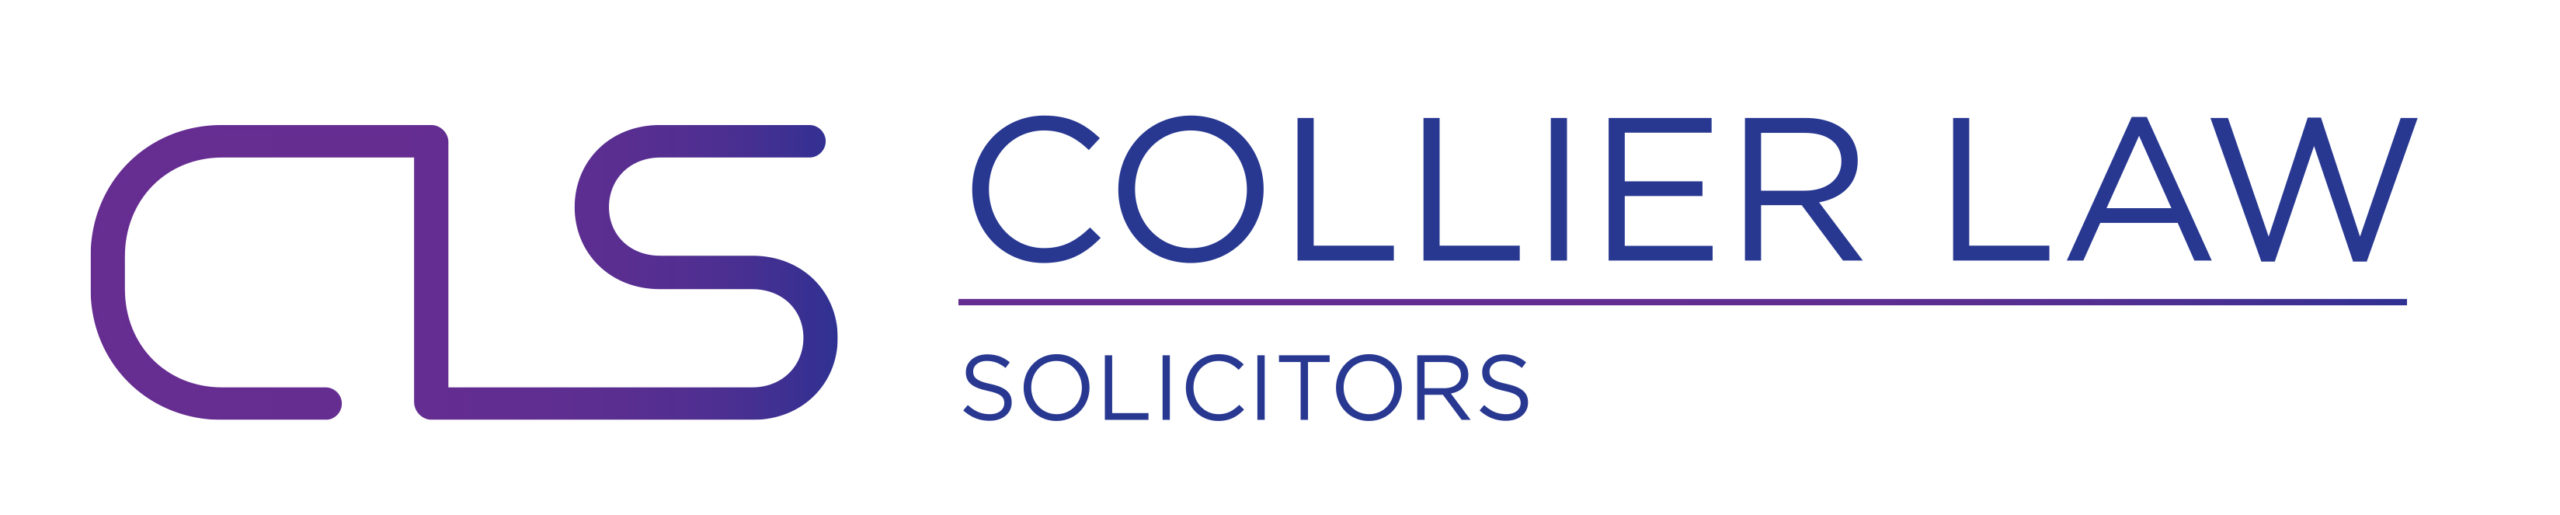 Collier Law Solicitors